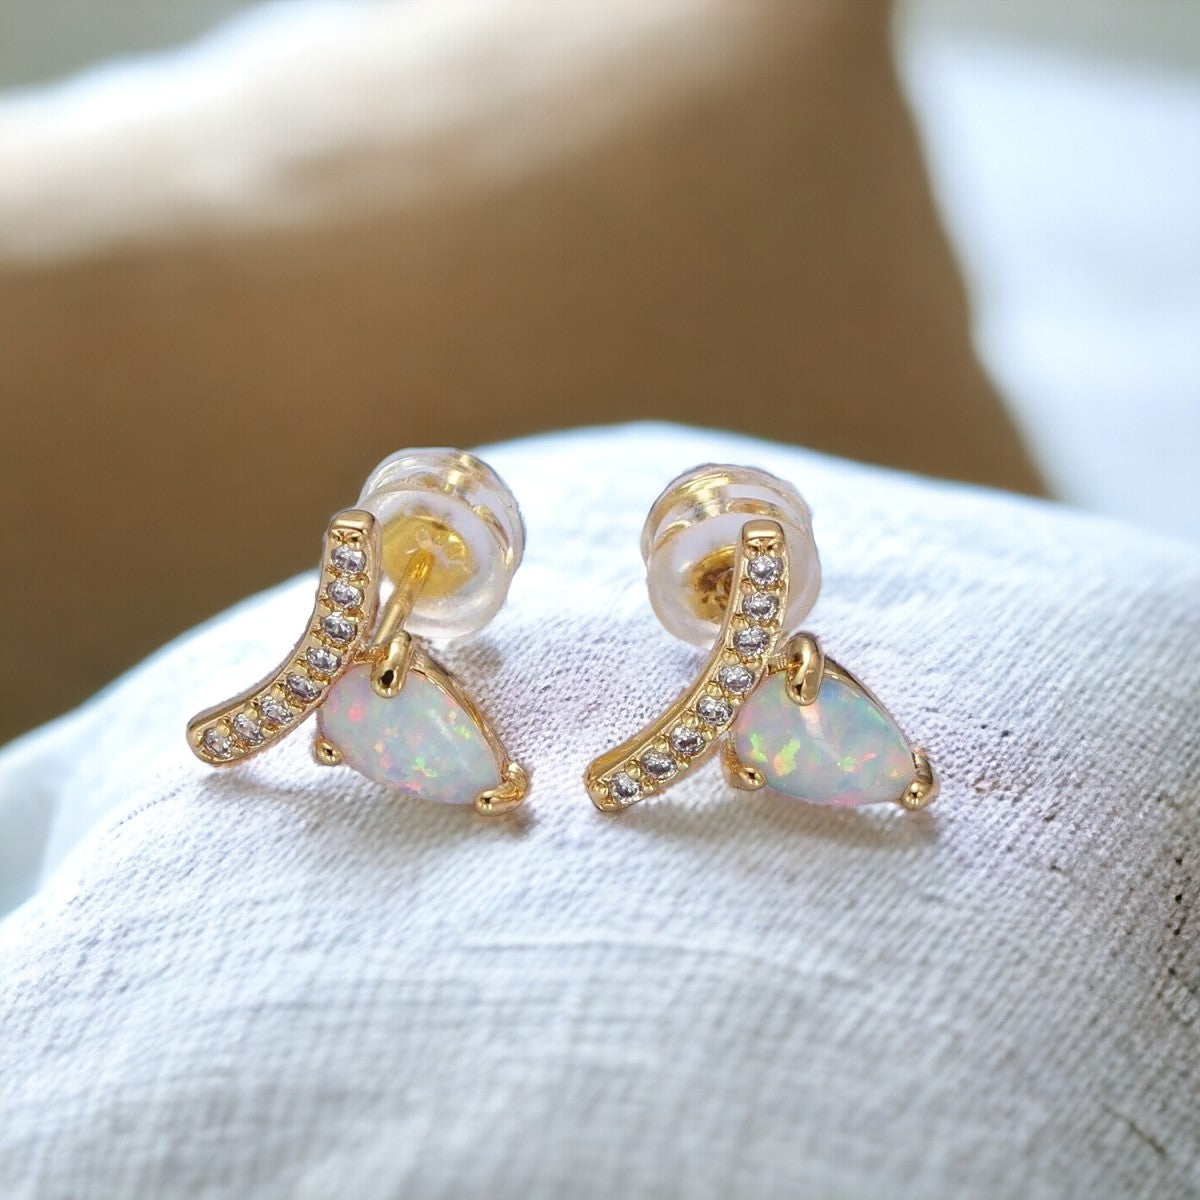 Golden Glimmer Stud Earrings - 14k Gold Filled Opal and CZ